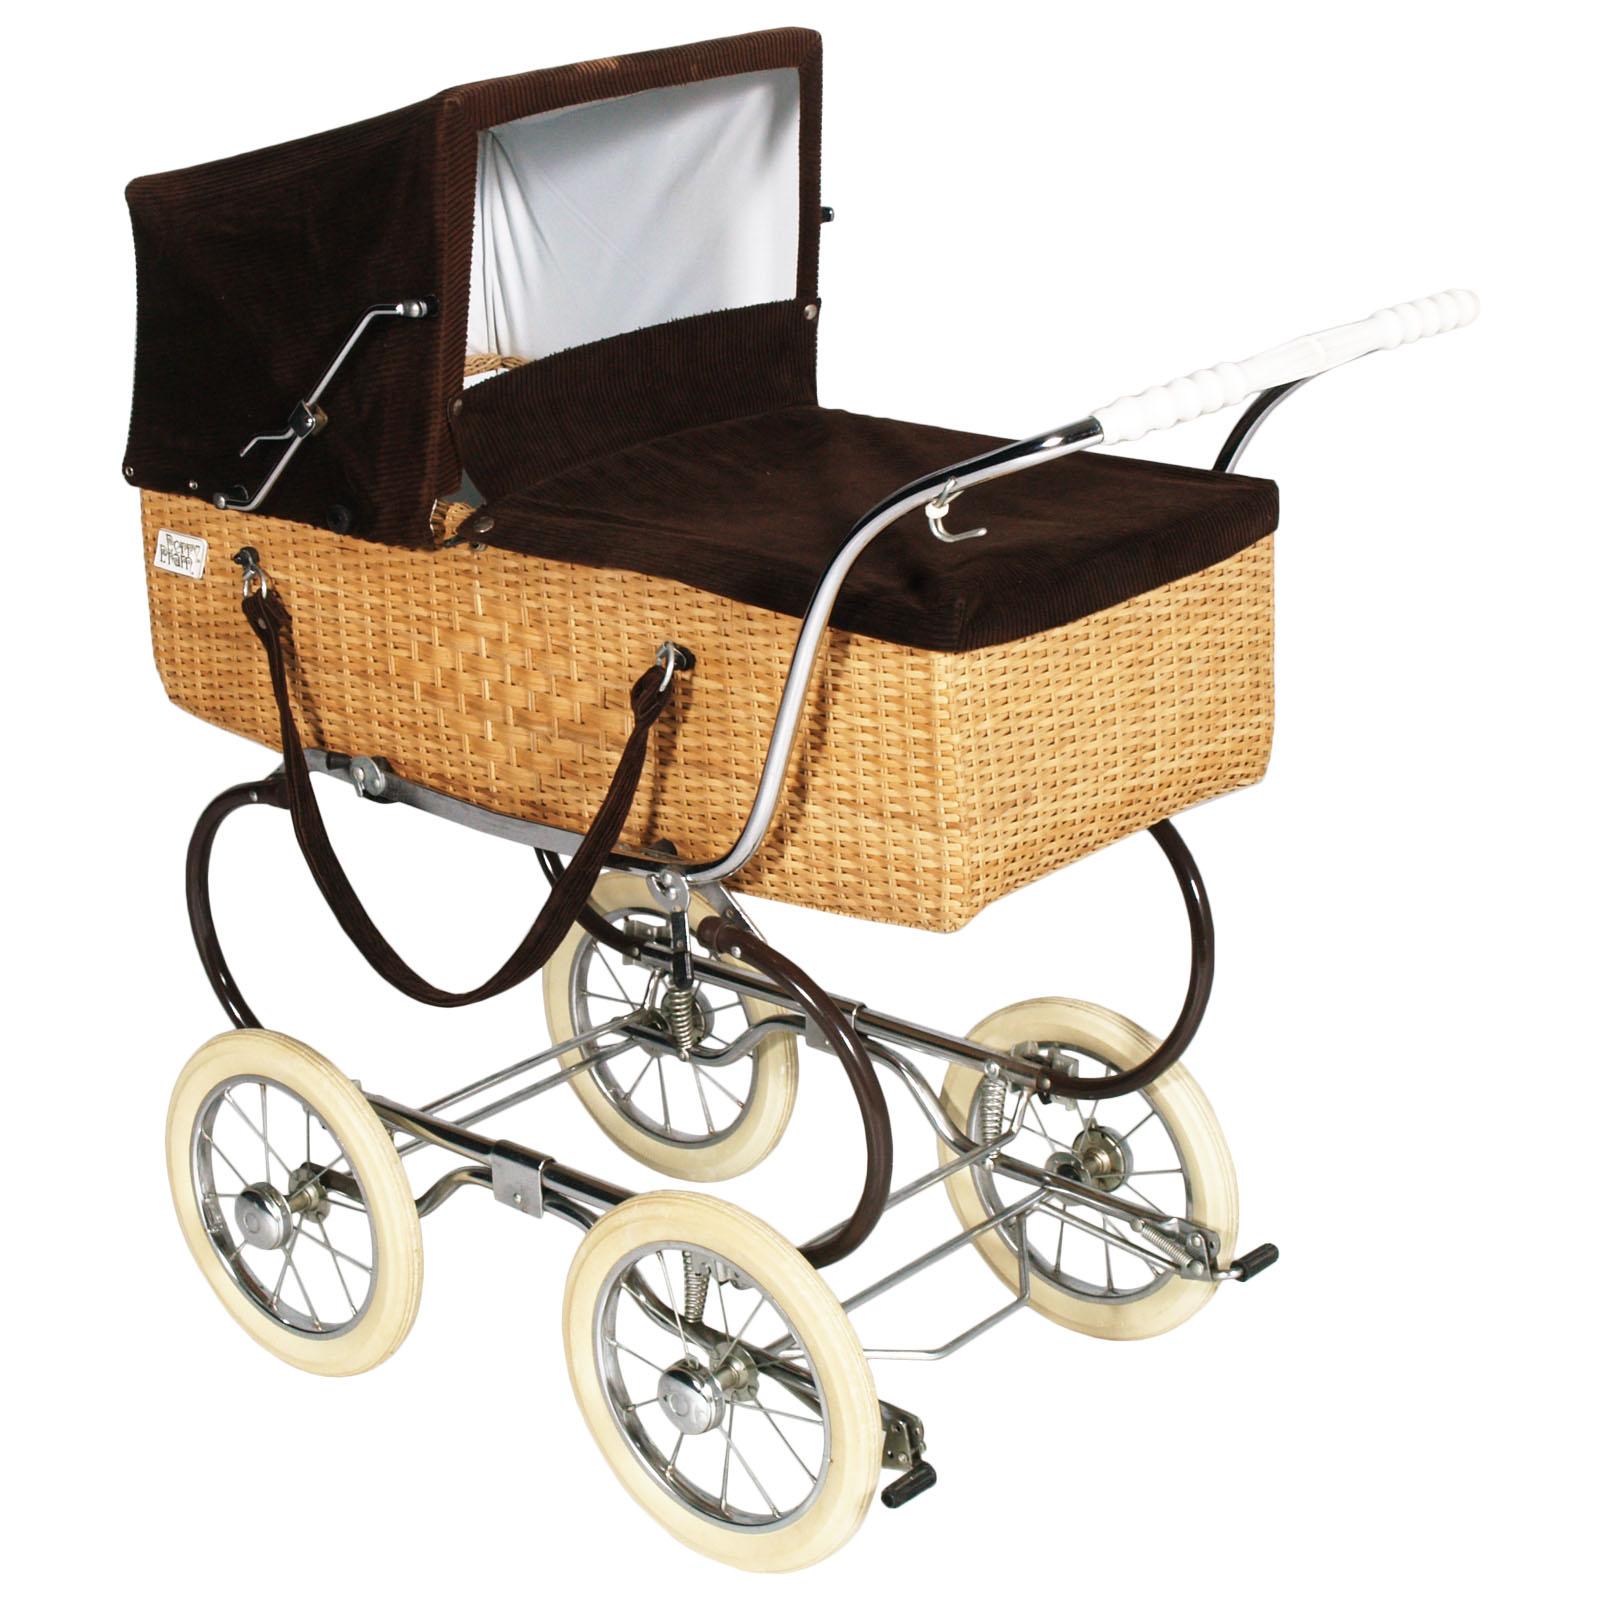 baby carriage for sale